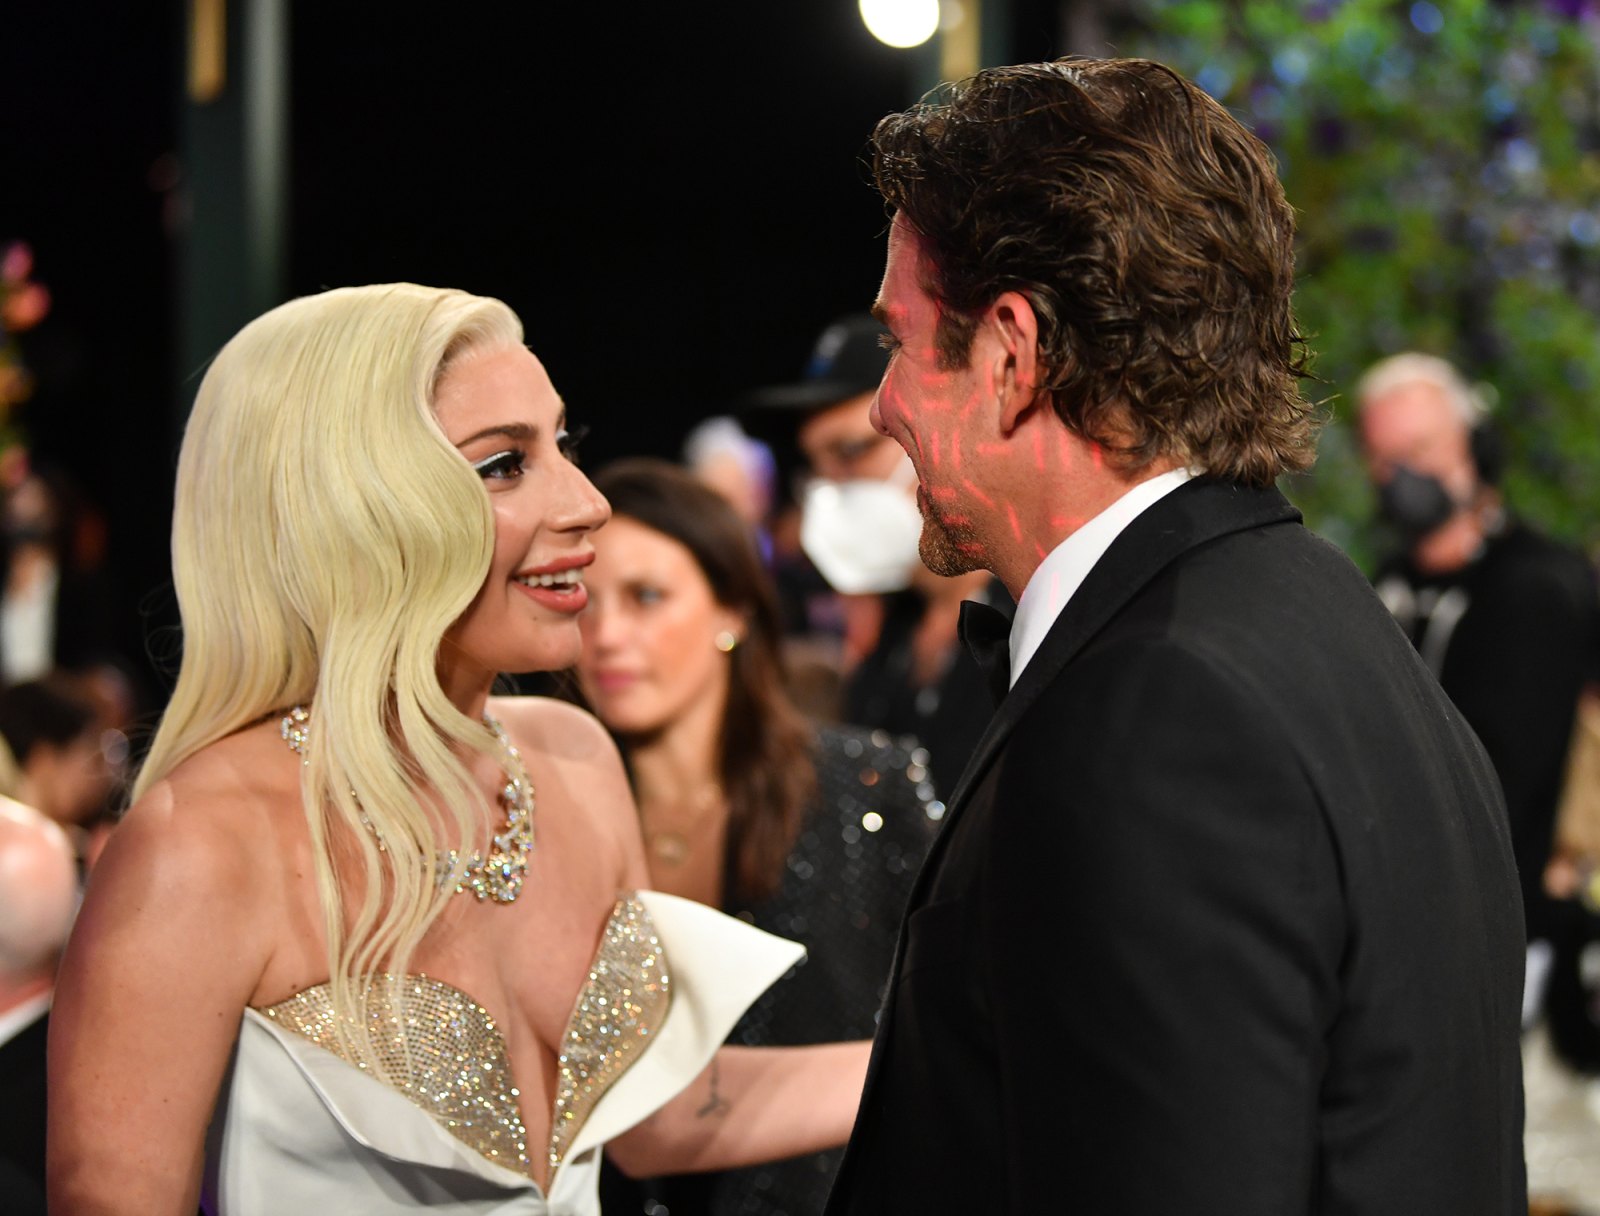 The Best Awards Show Costar Reunions Lady Gaga and Bradley Cooper the Cast of Scandal and More